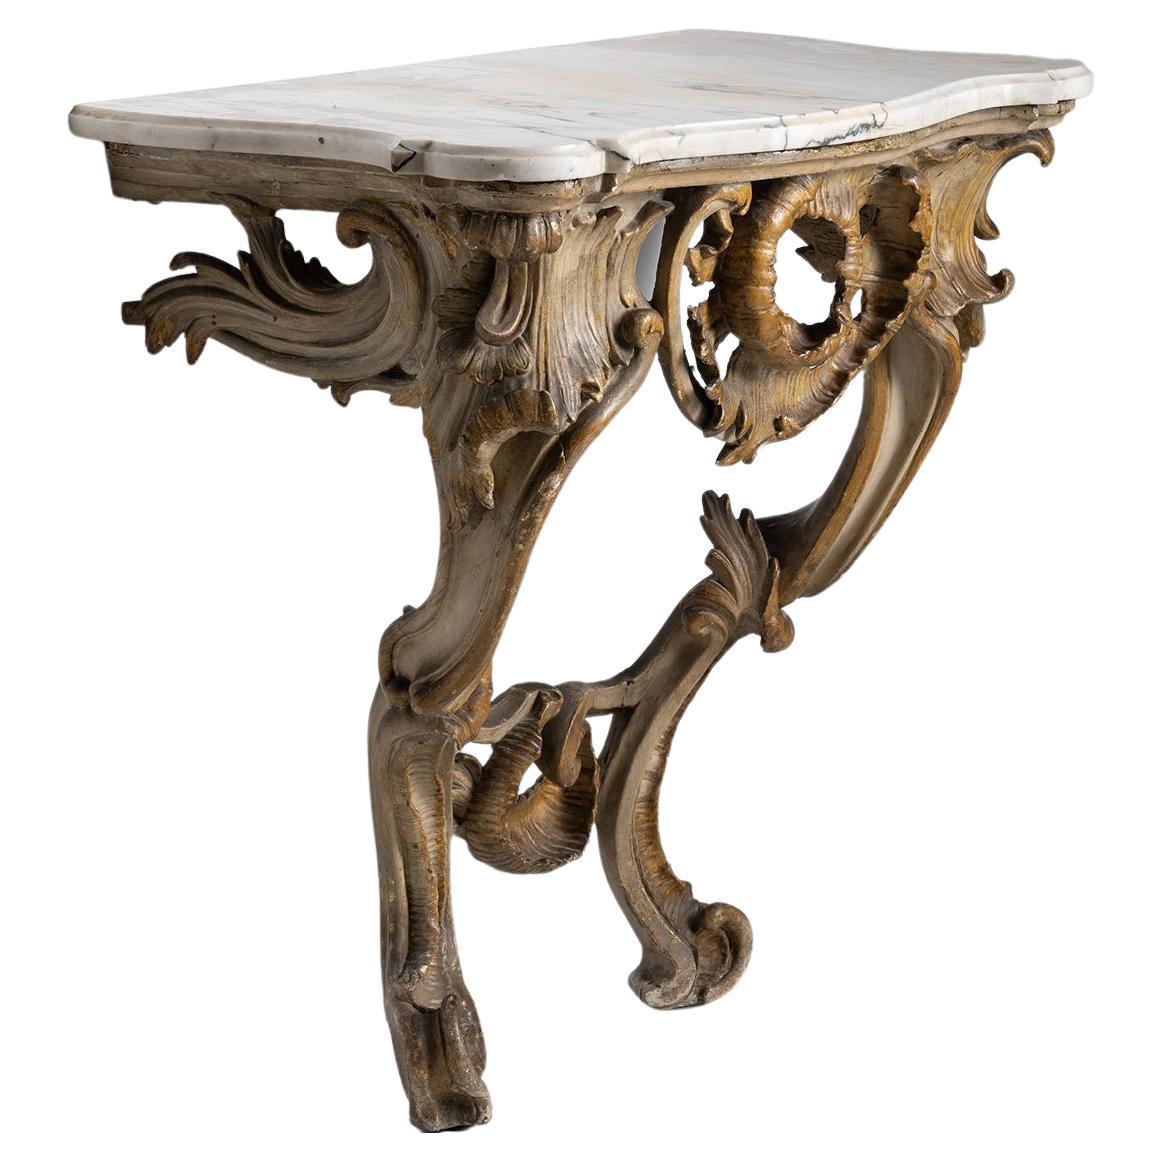 Carved Console Table with Carrara Marble Top, Italy, Circa 1750